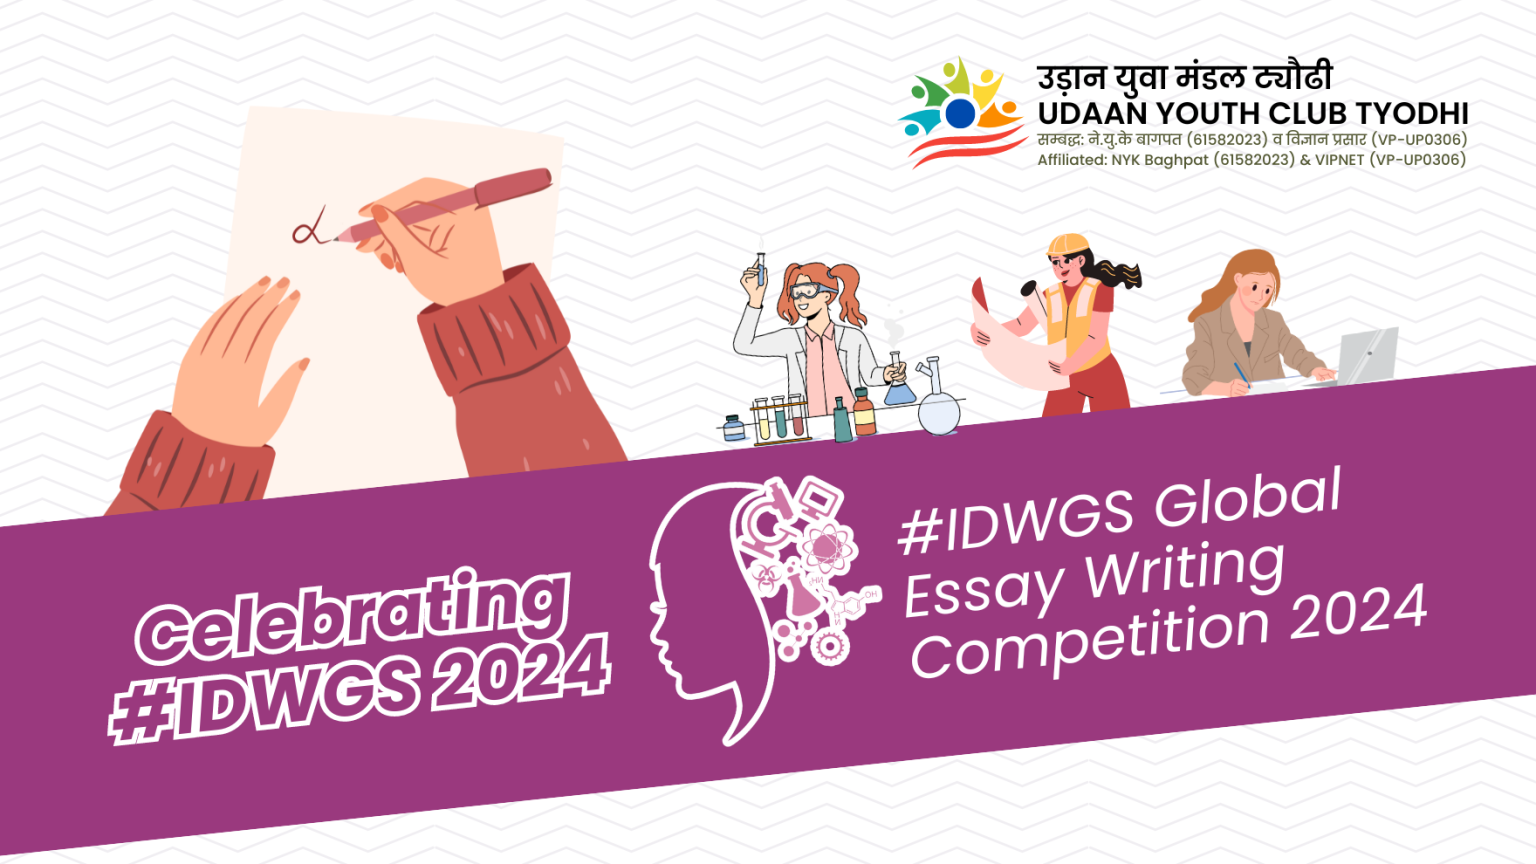 IDWGS Global Essay Writing Competition 2024 on International Day of Women & Girls in Science